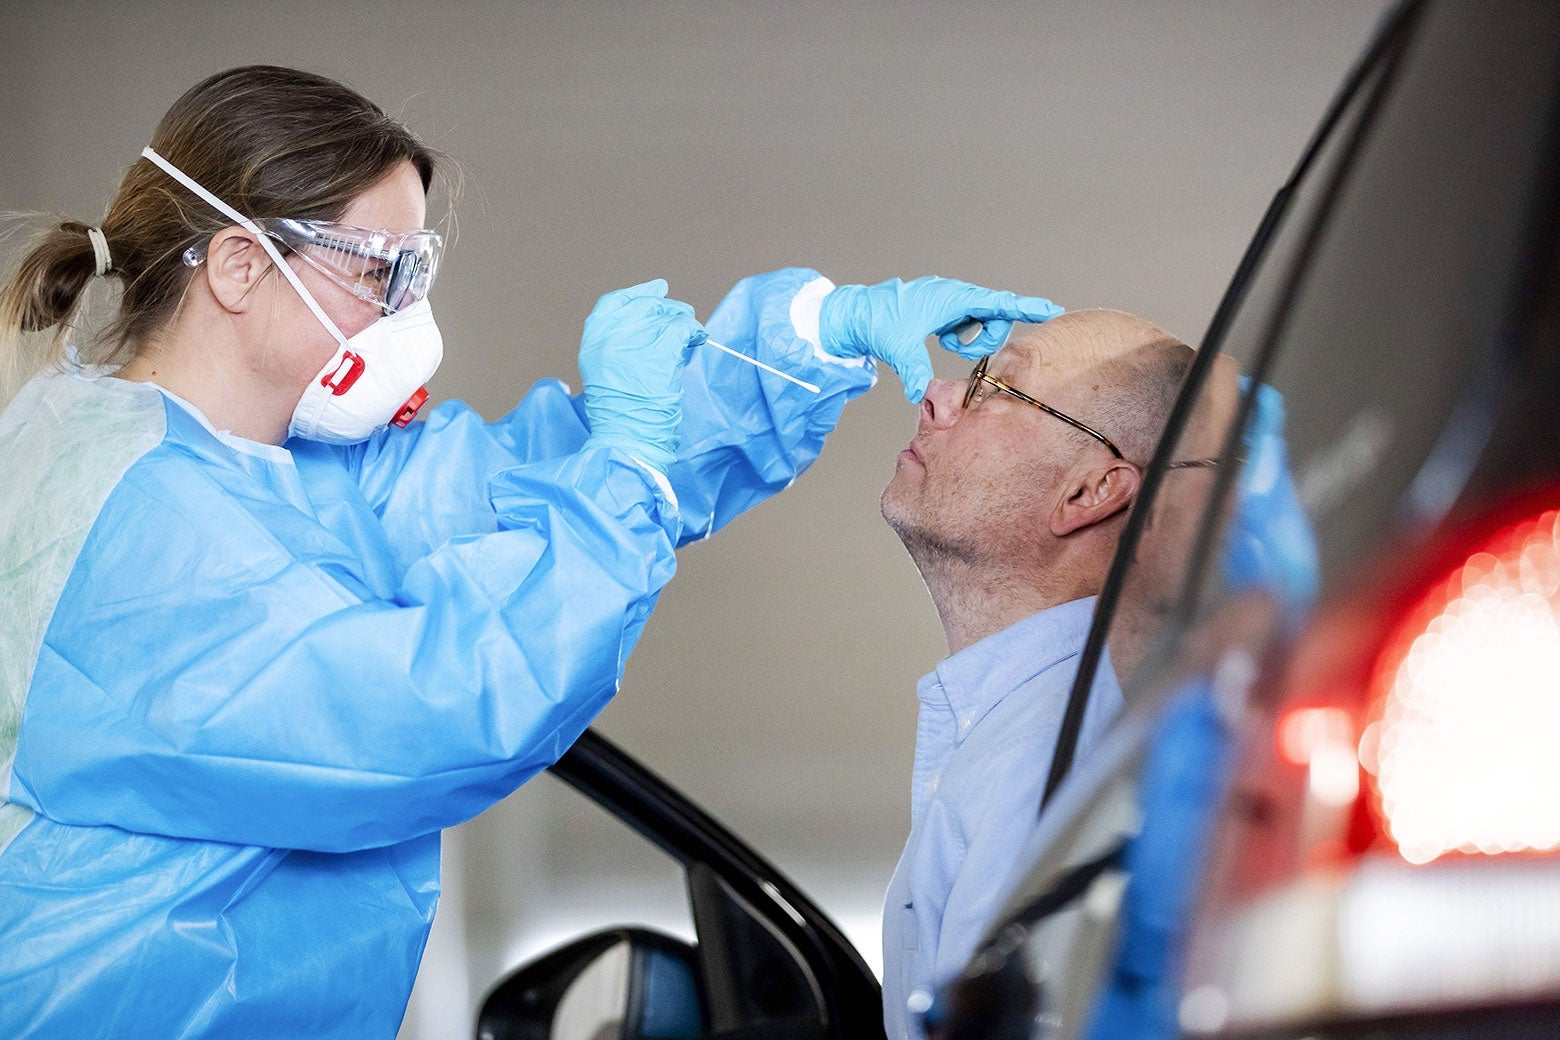 A medical worker wearing protective gear pushes up a patient's nose with one hand and lowers a long swab toward the nose with the other hand